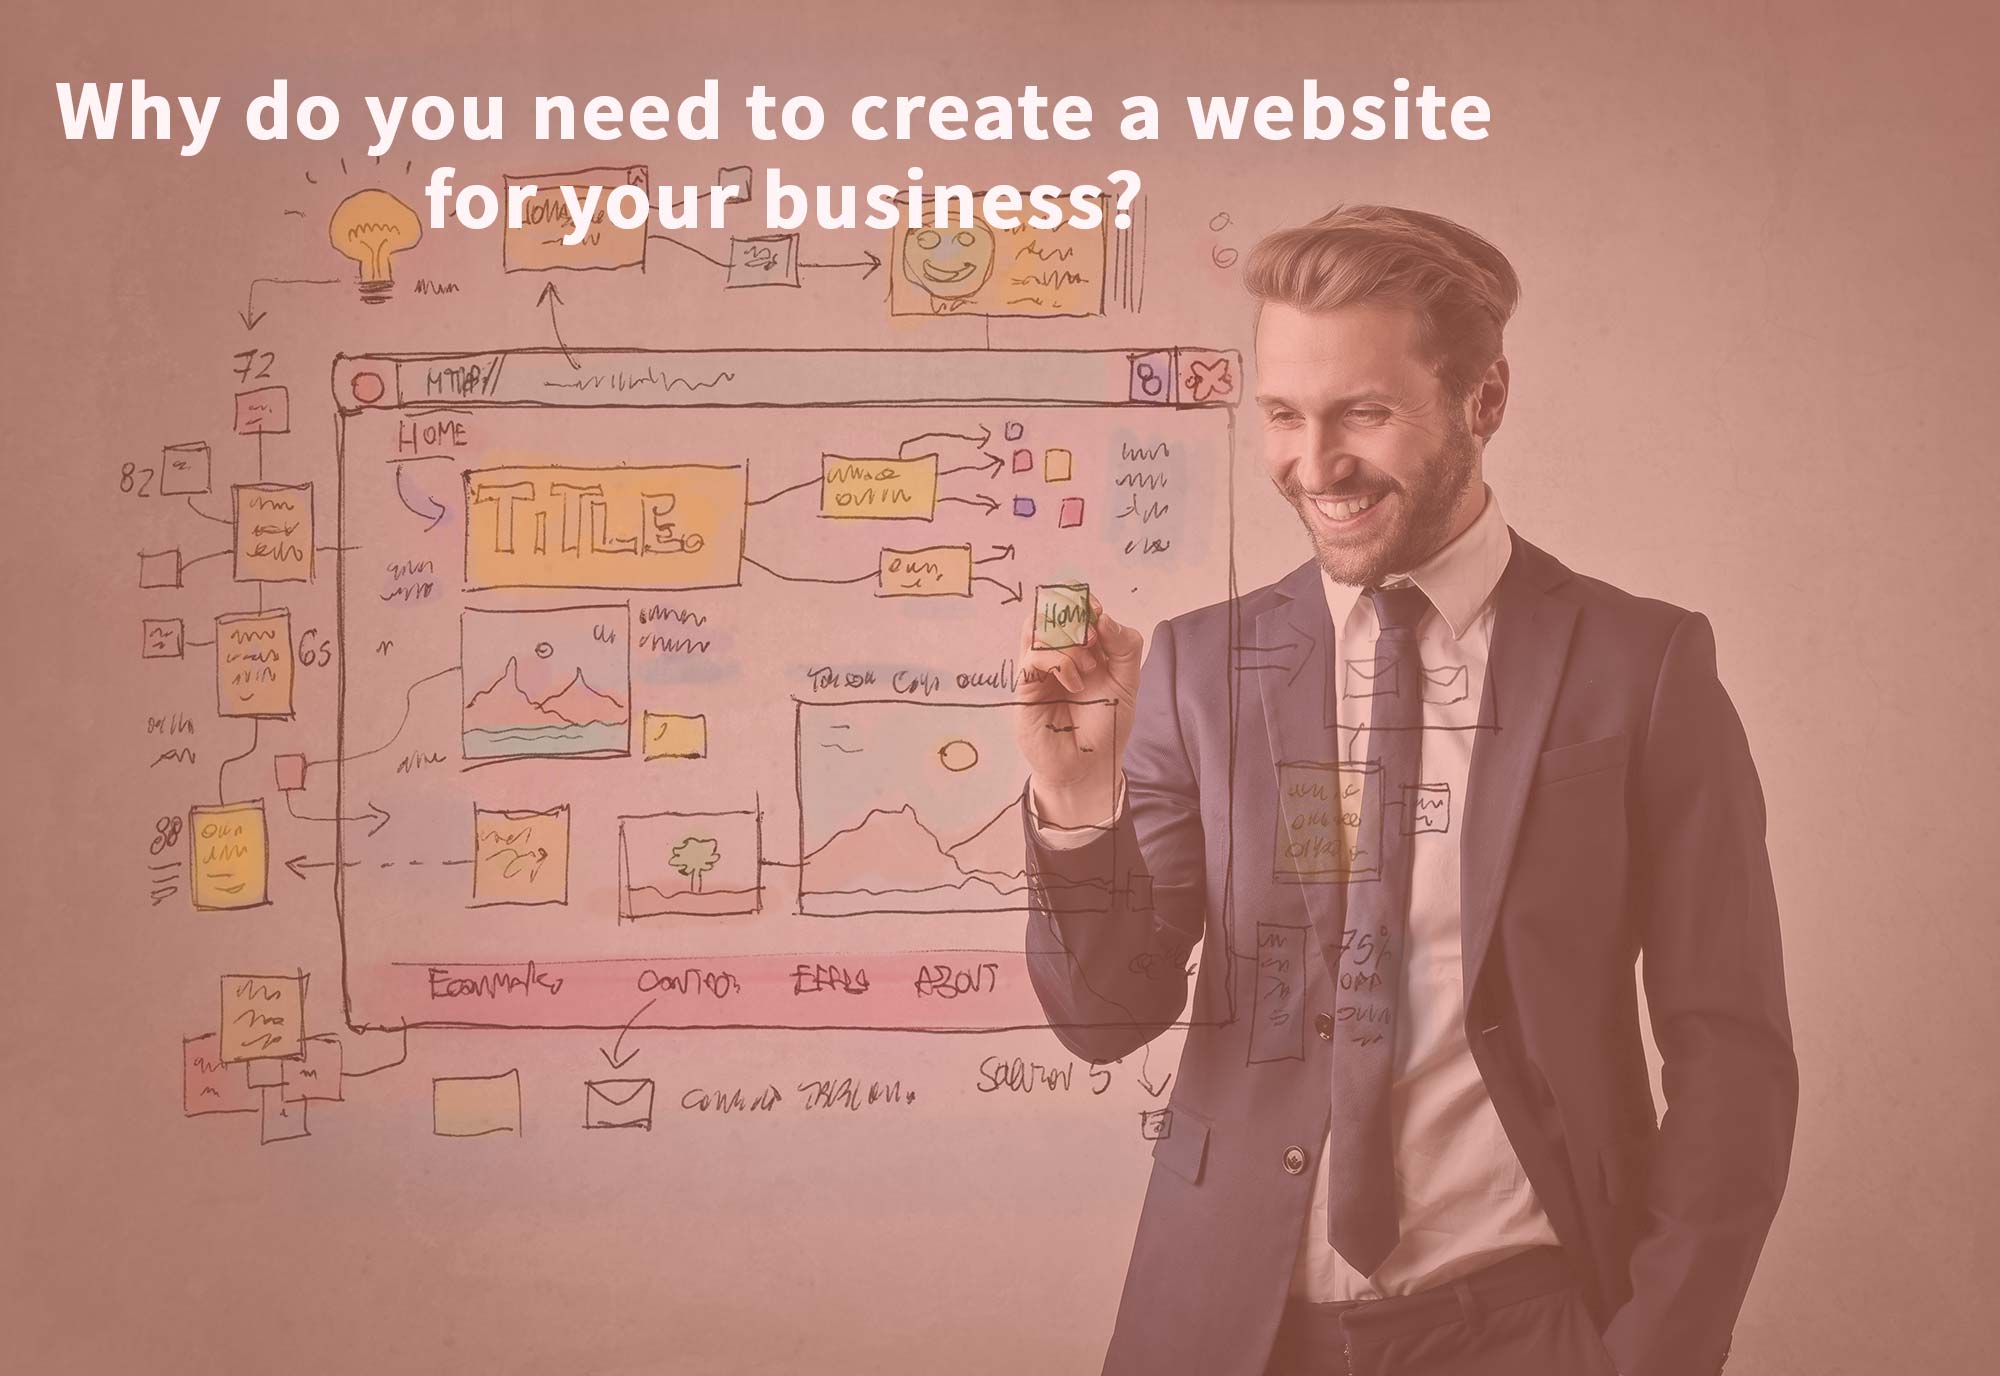 Why do you need to create a website for your business?